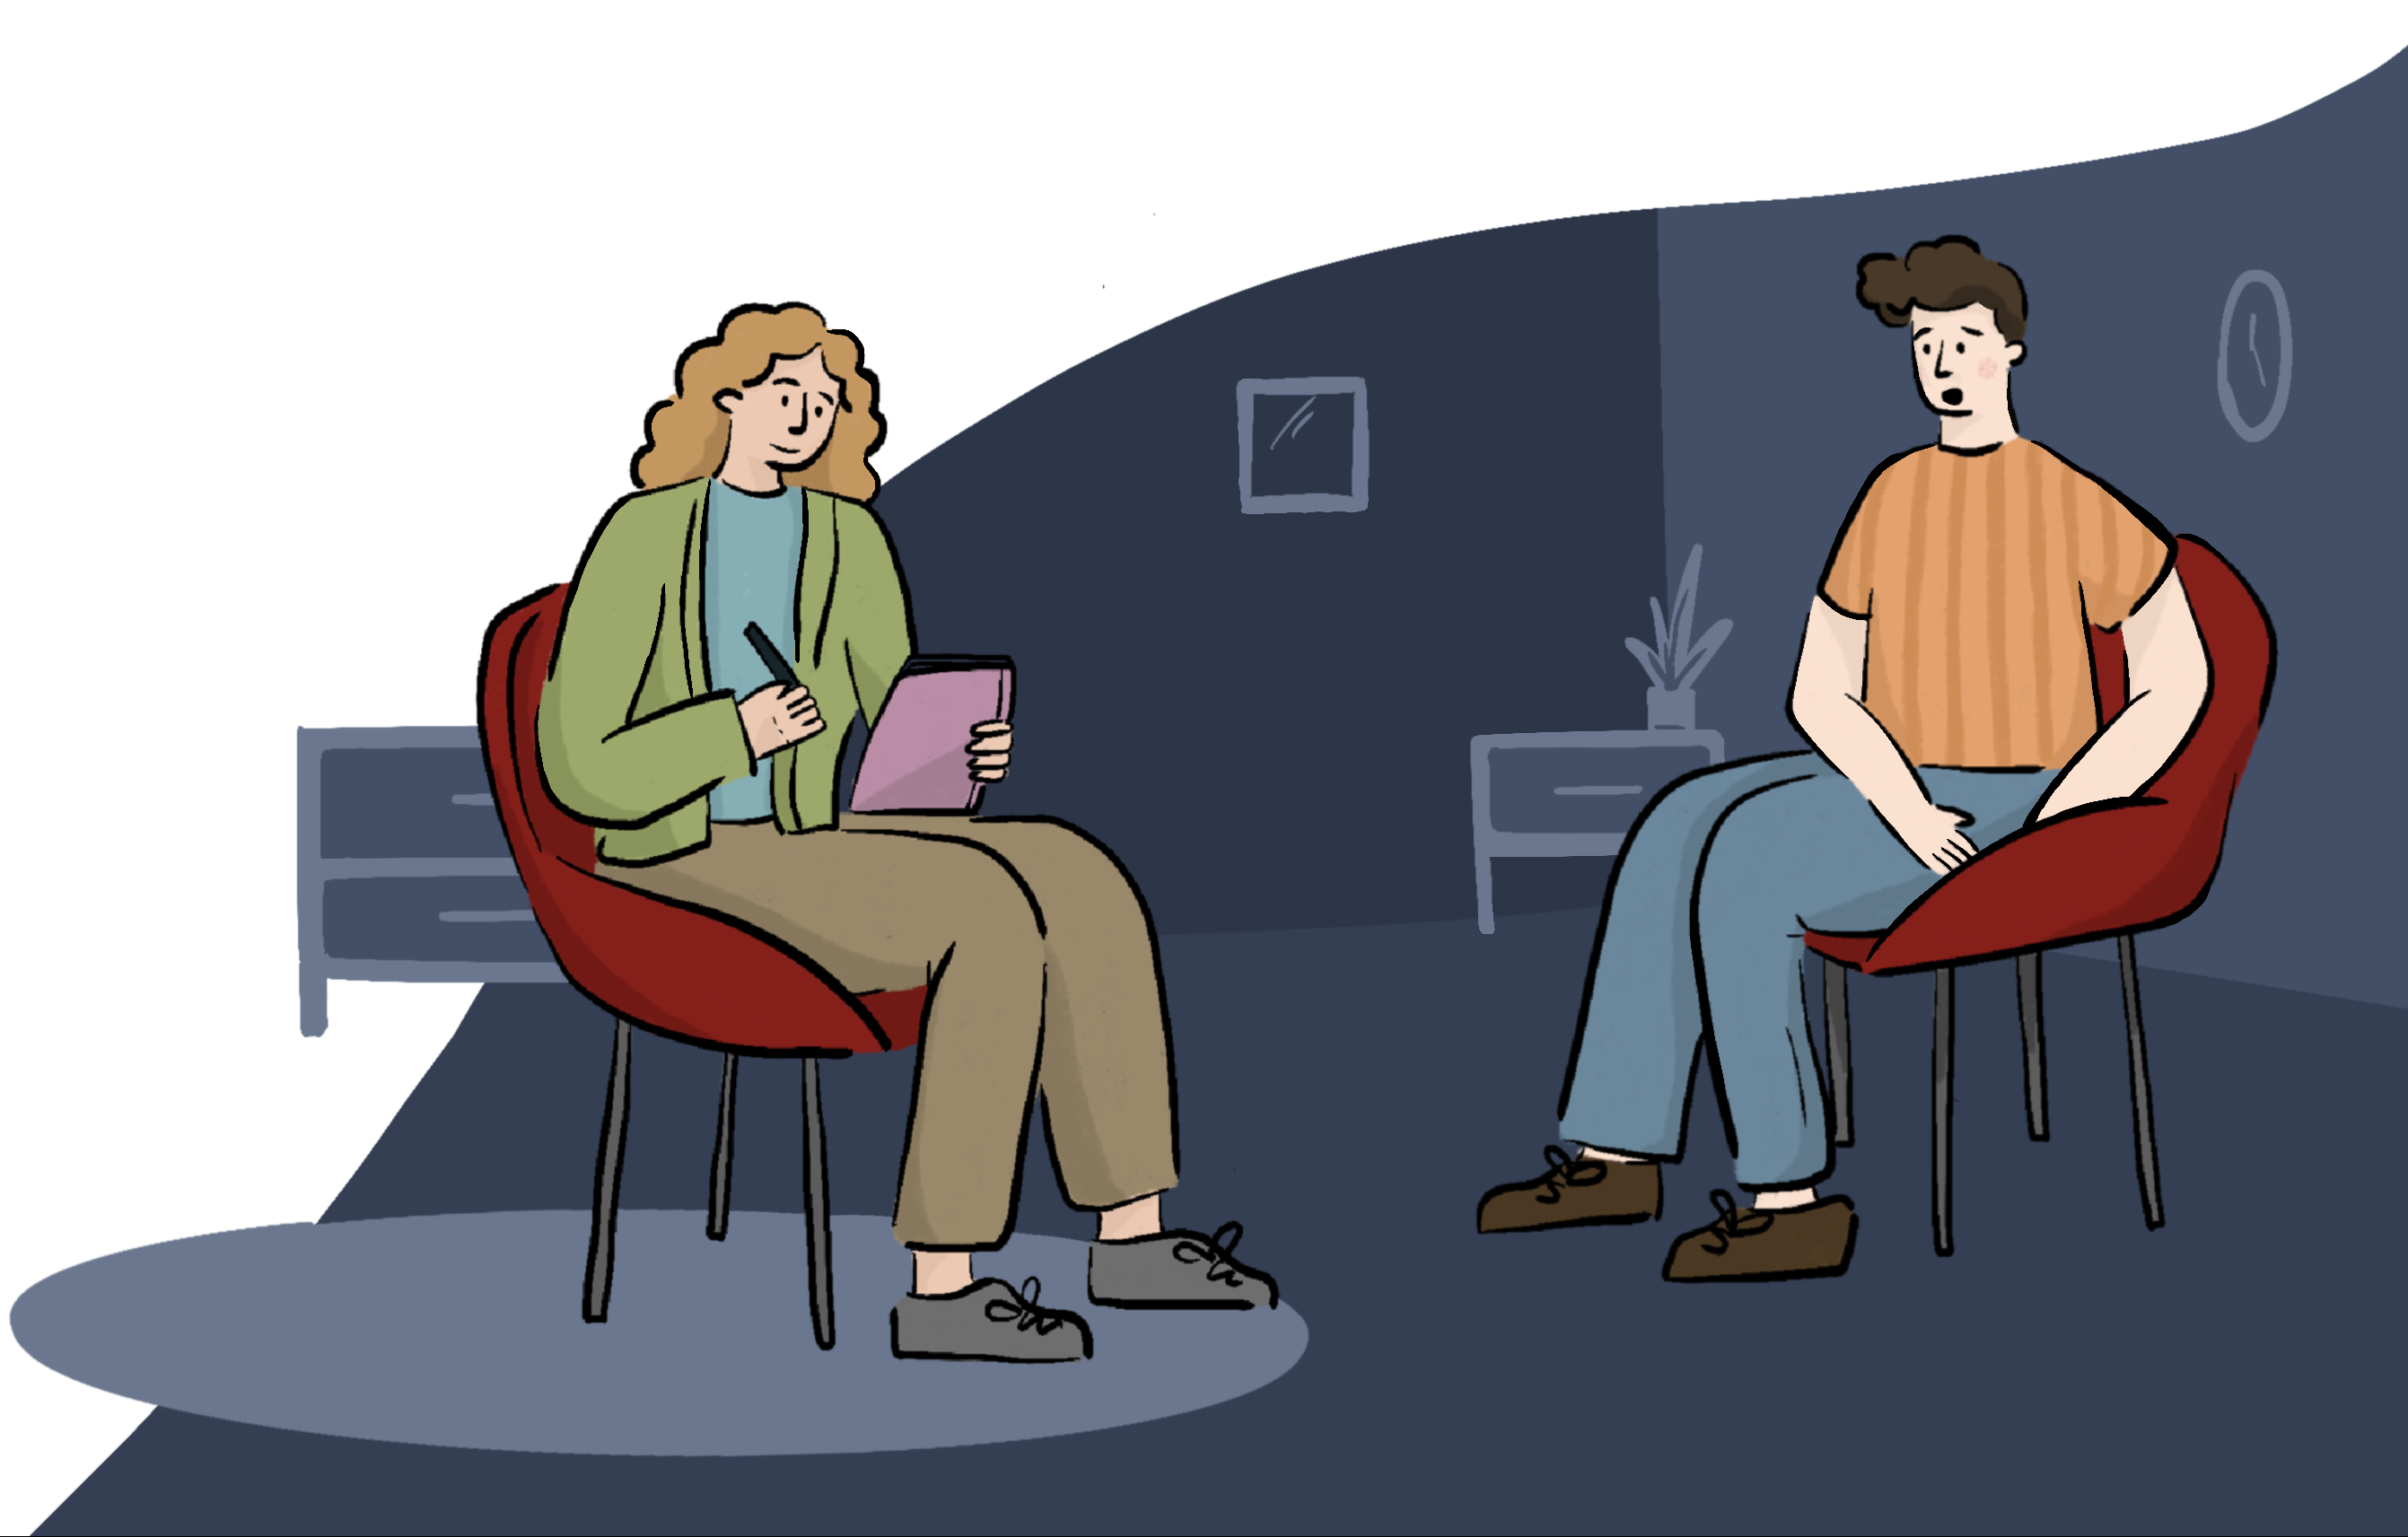 An illustration of a therapy session taking place